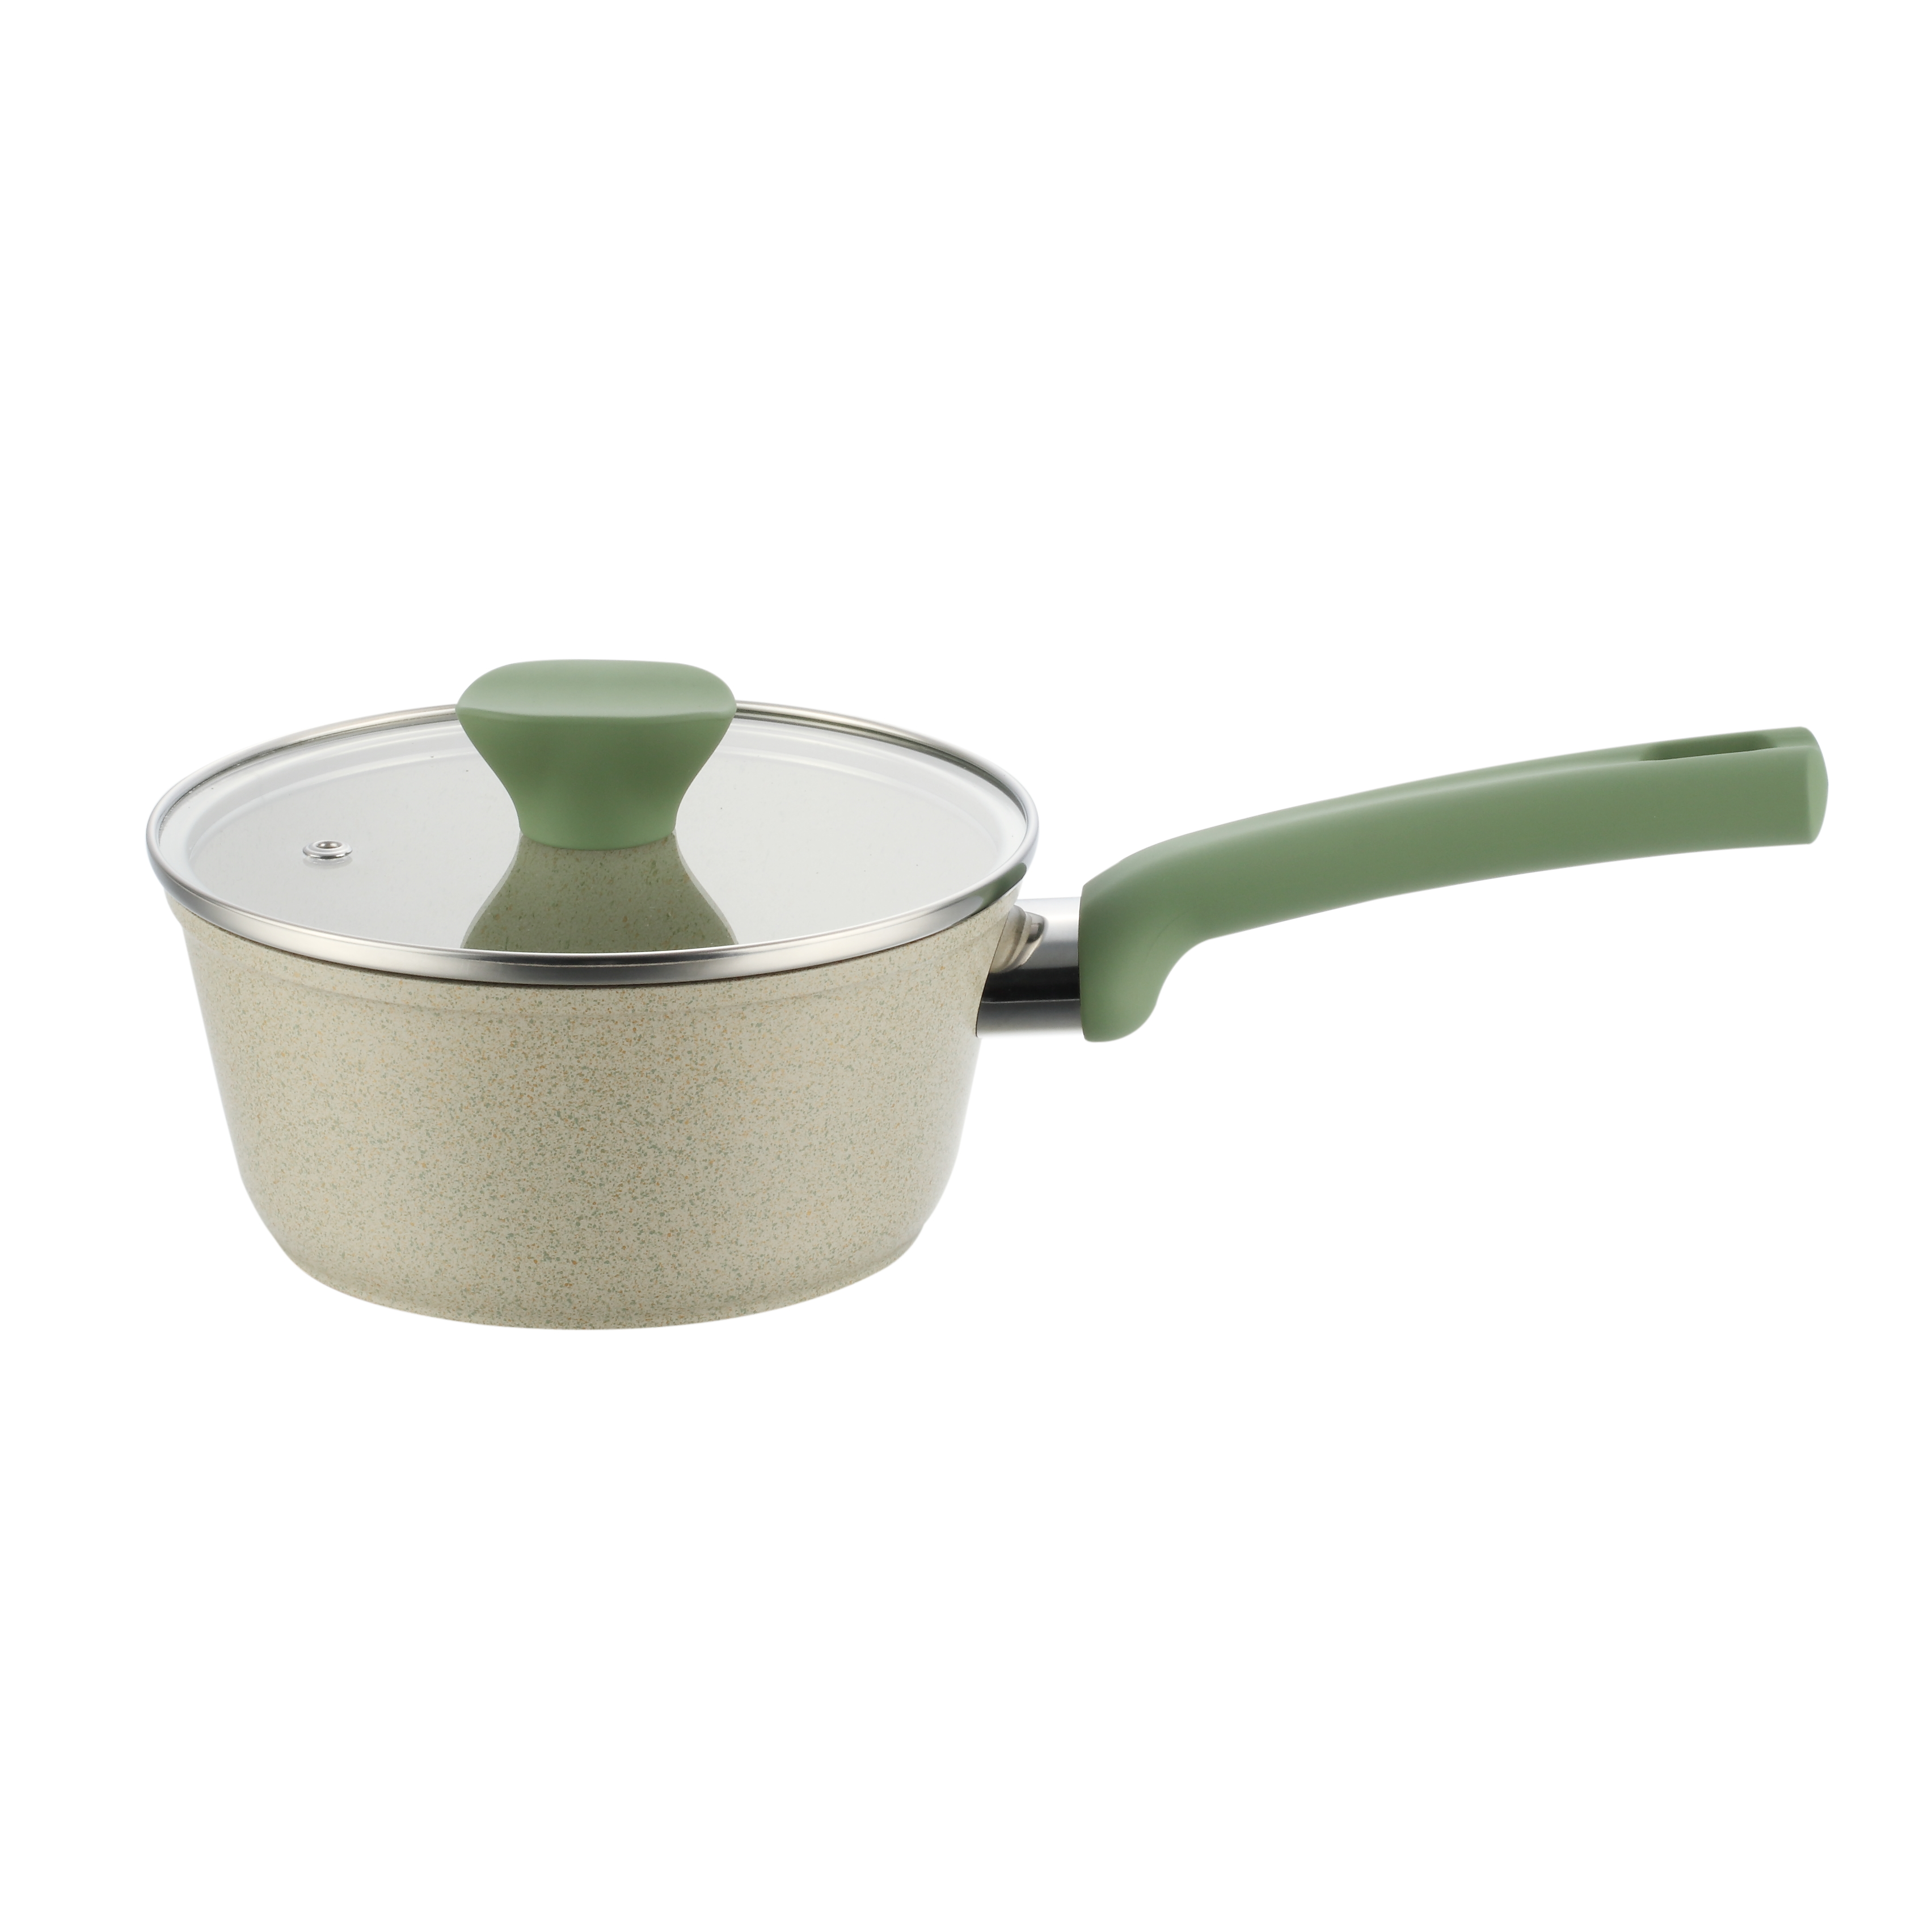 Vintage Granite Marble Stone Coating Saucepan And Saucepot with Lid High Quality Aluminum Cookware with Induction Dishwasher Safe PFOA-Free LFGB FDA